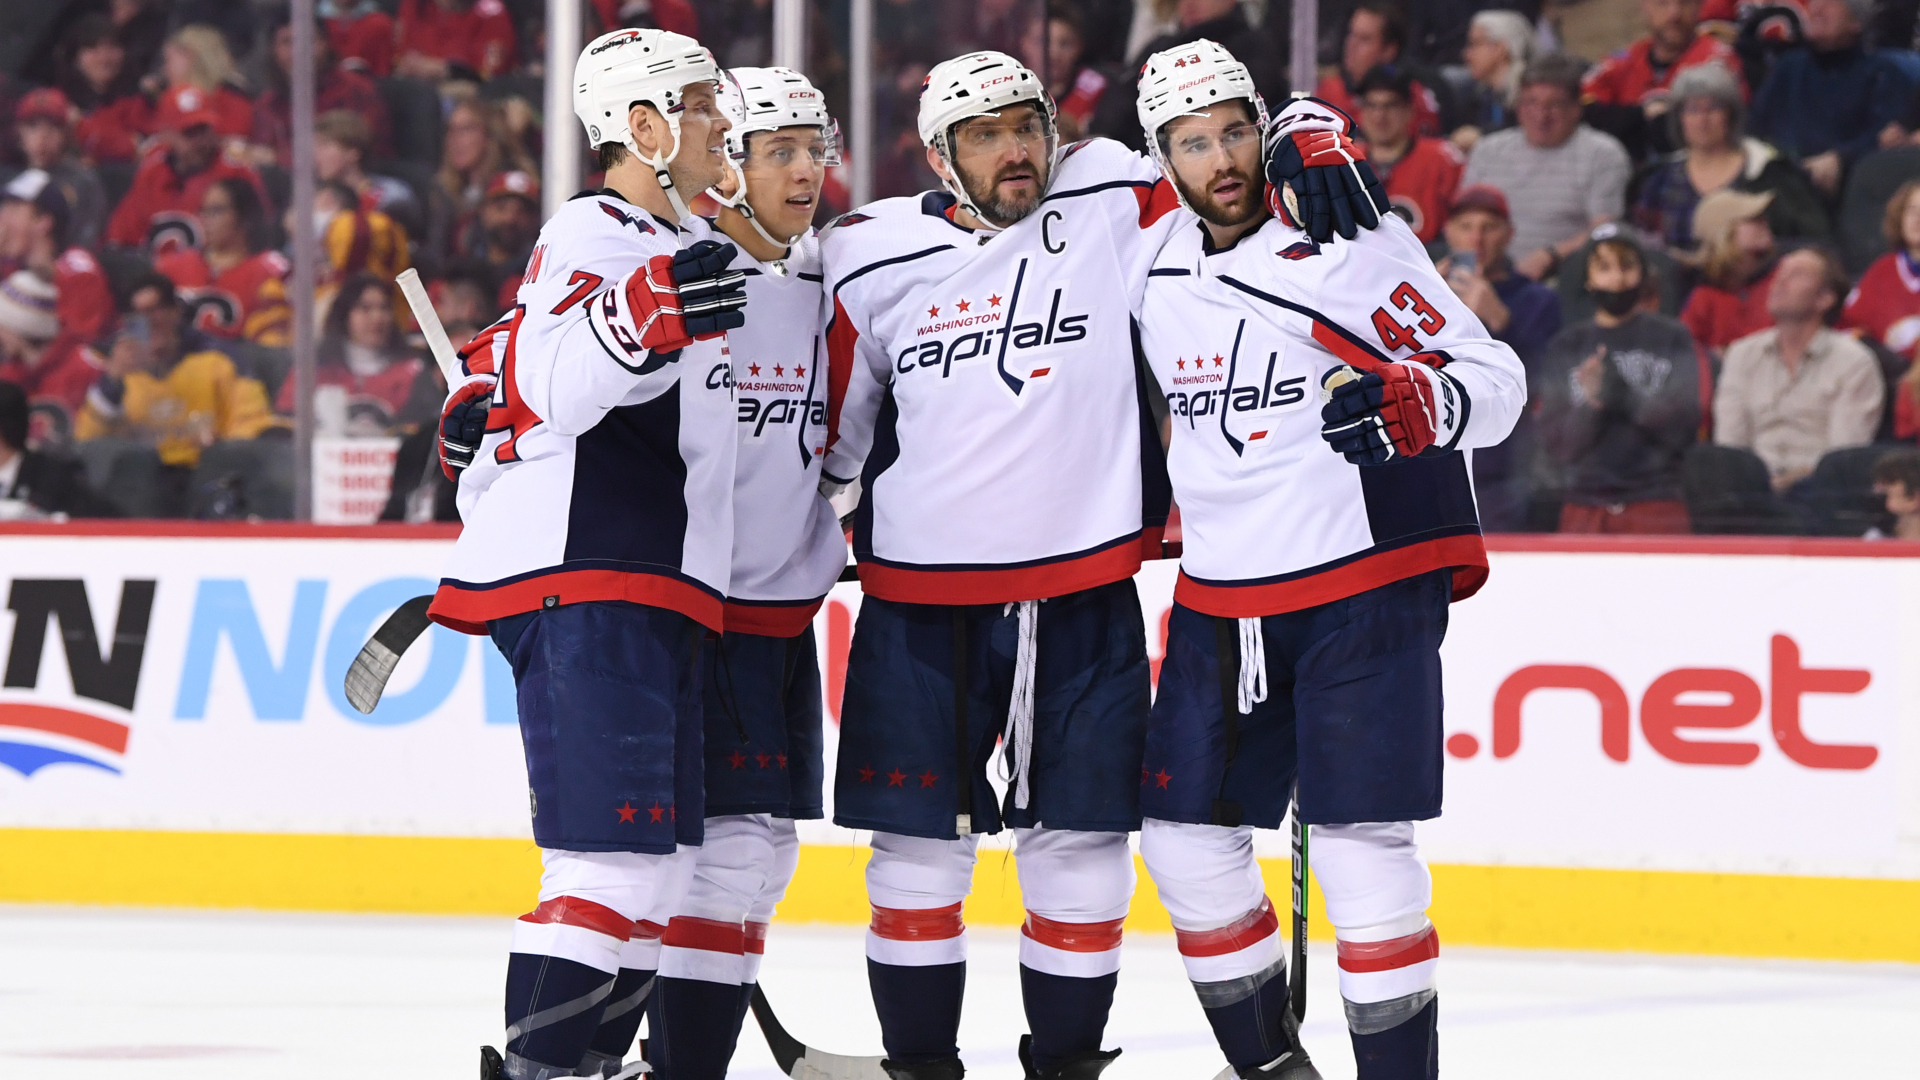 Historic night for Ovechkin, Backstrom, Caps in win at Calgary